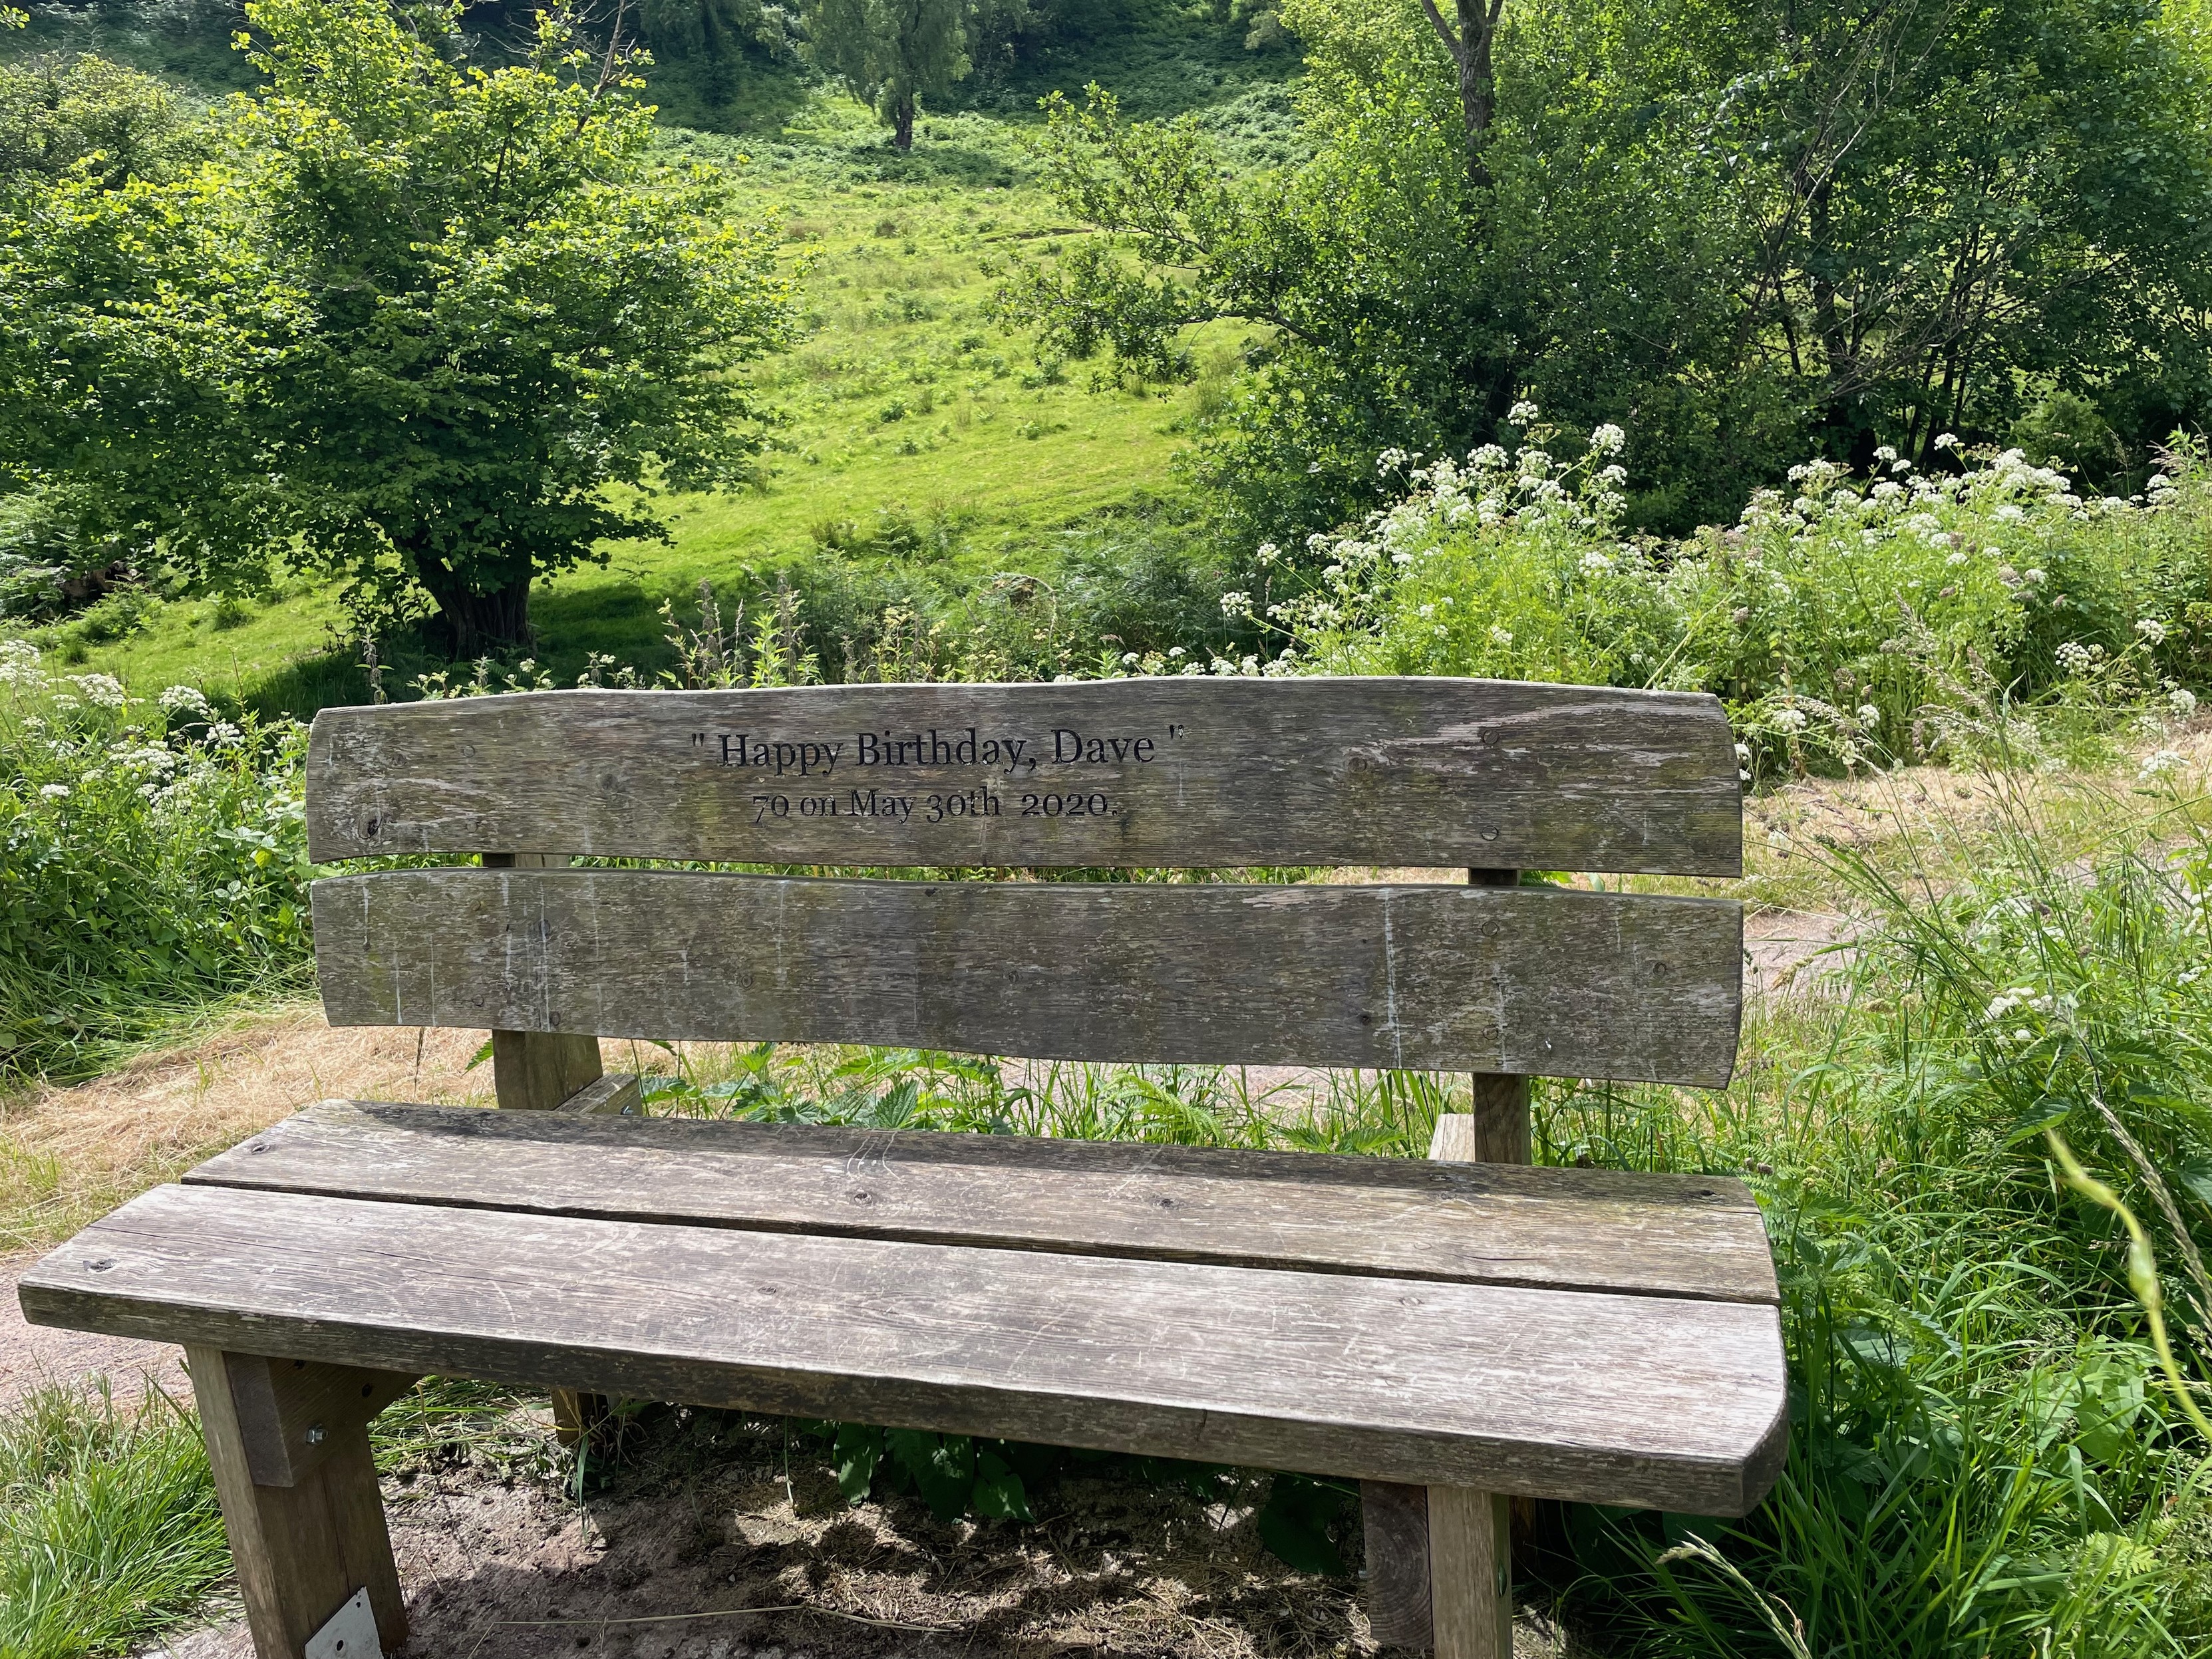 A wooden park bench. Behind it, a path and beyond a  grassy slope and trees. The carving on the bench reads “Happy Birthday Dave”